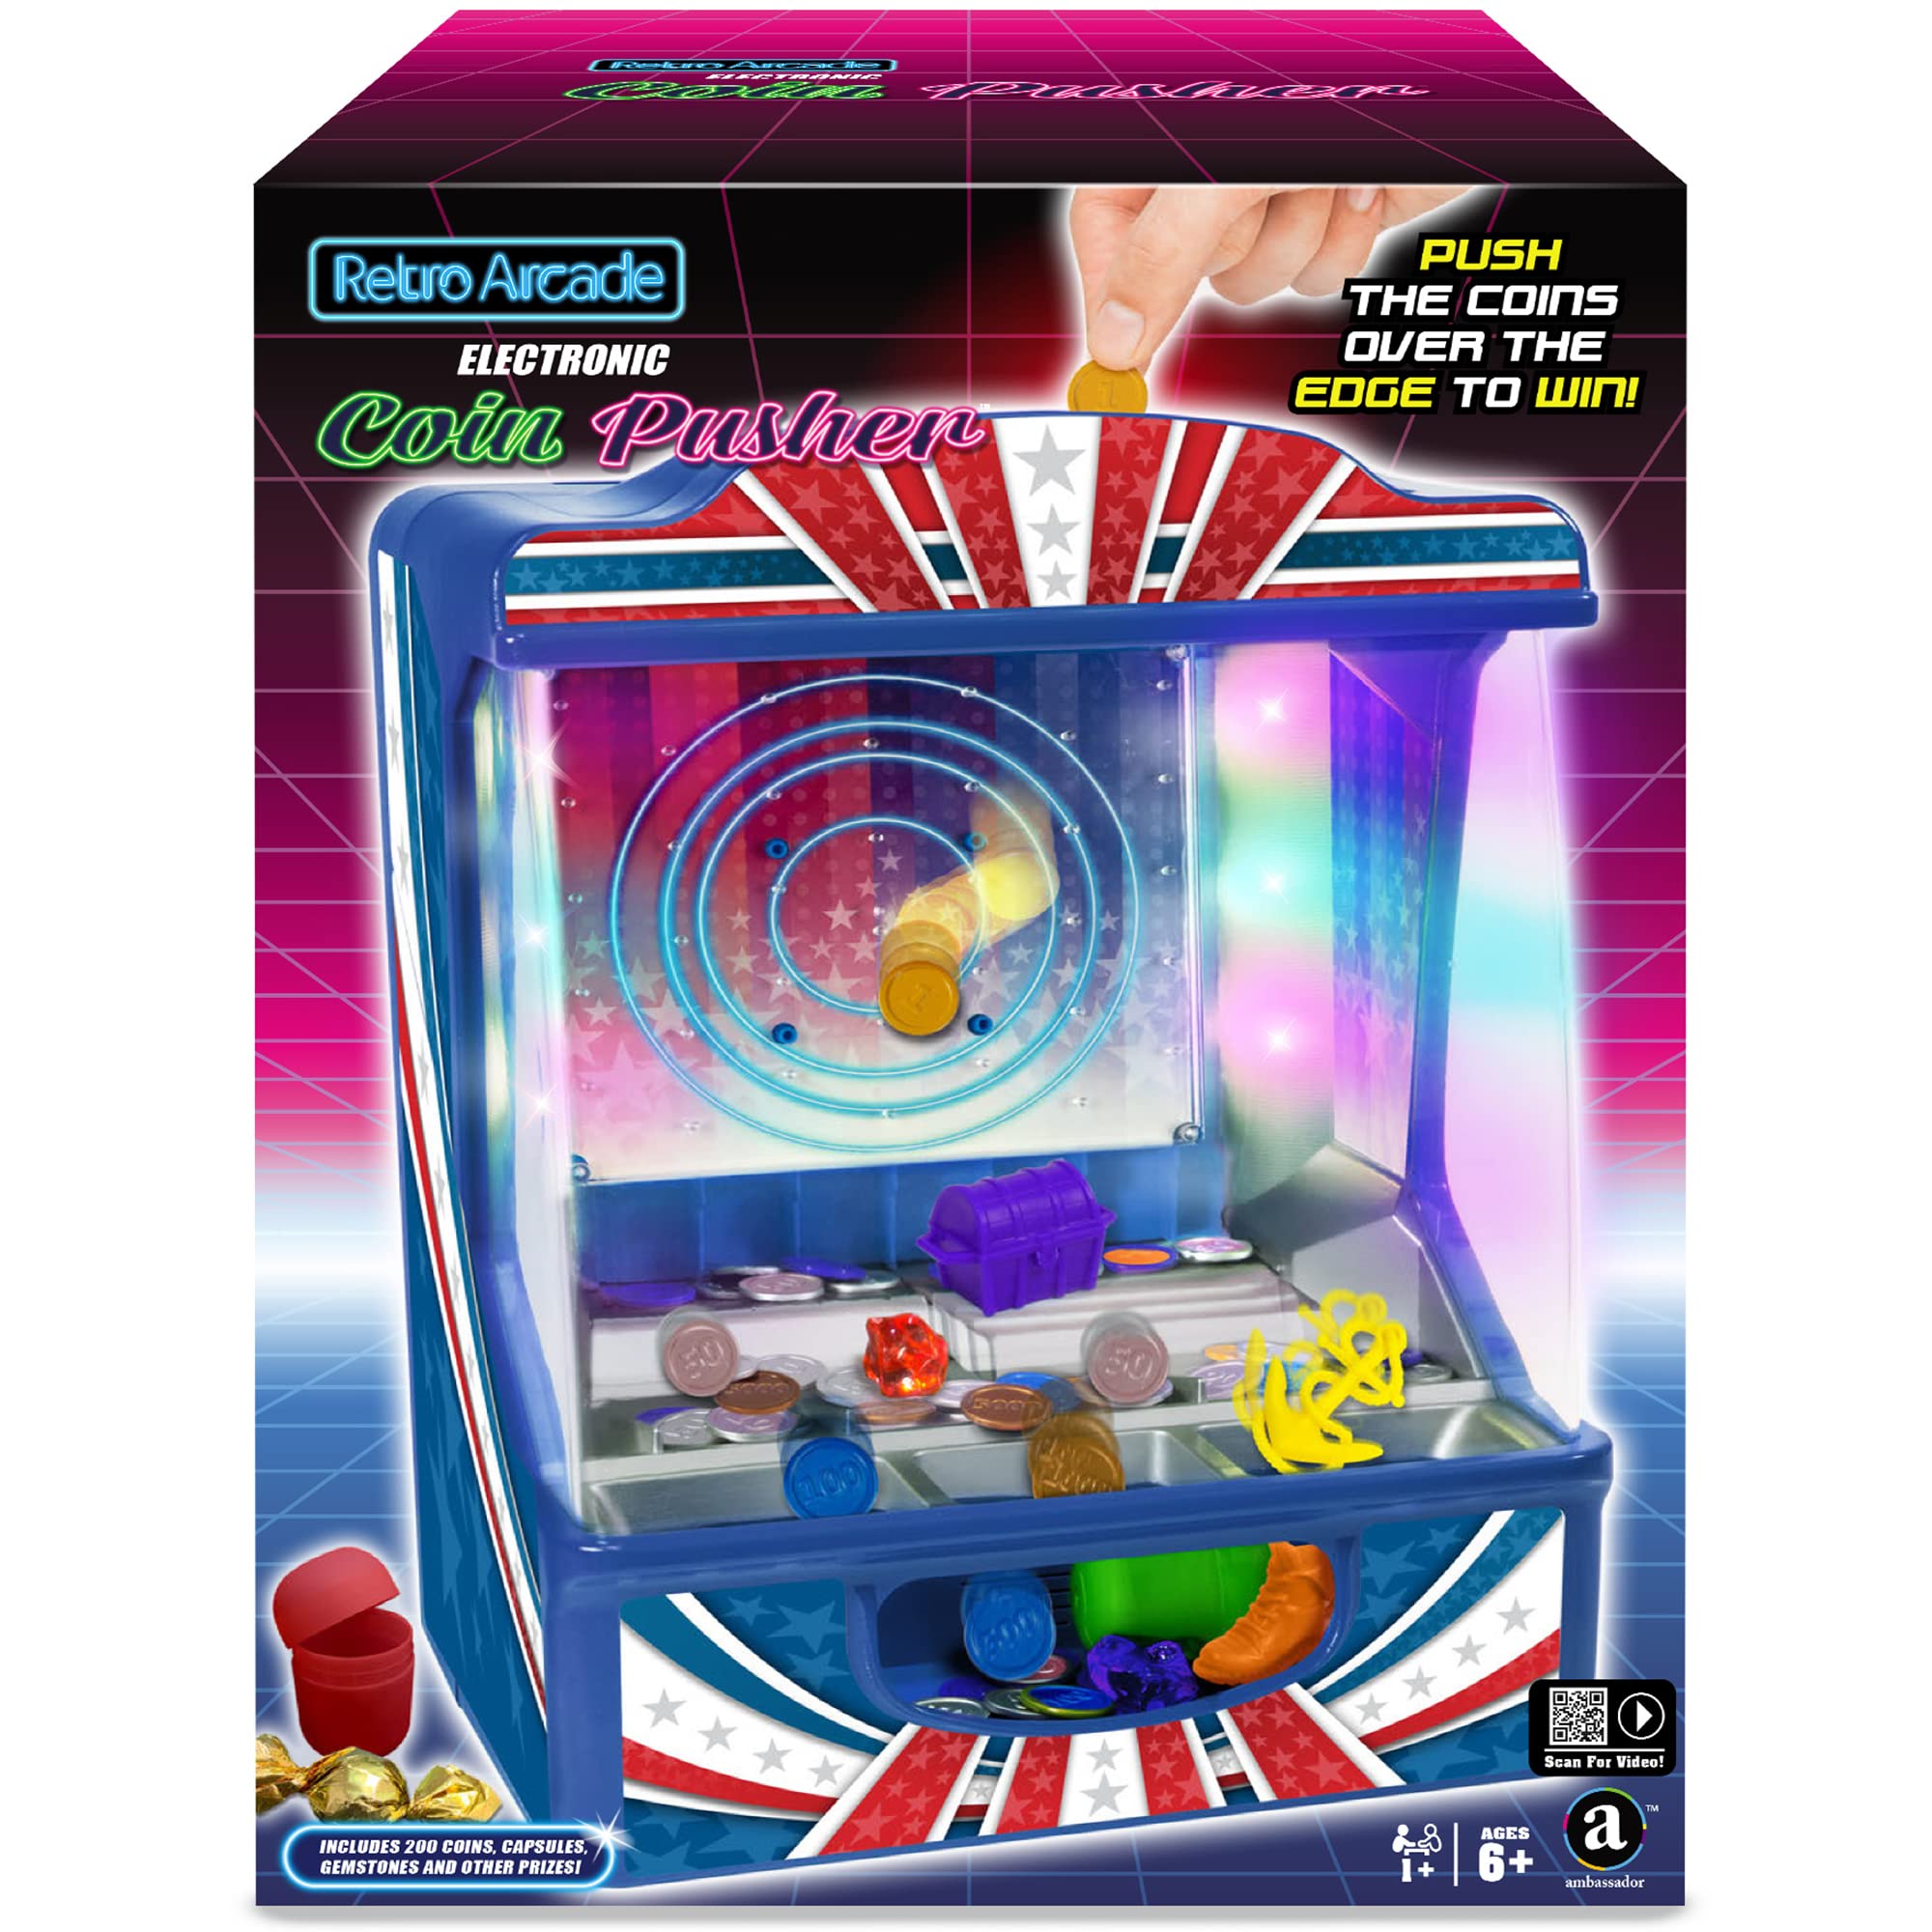 Retro Arcade Electronic: Coin Pusher - Tabletop Game, Push The Coins Over The Edge to Win, 1 Player, Ages 6+